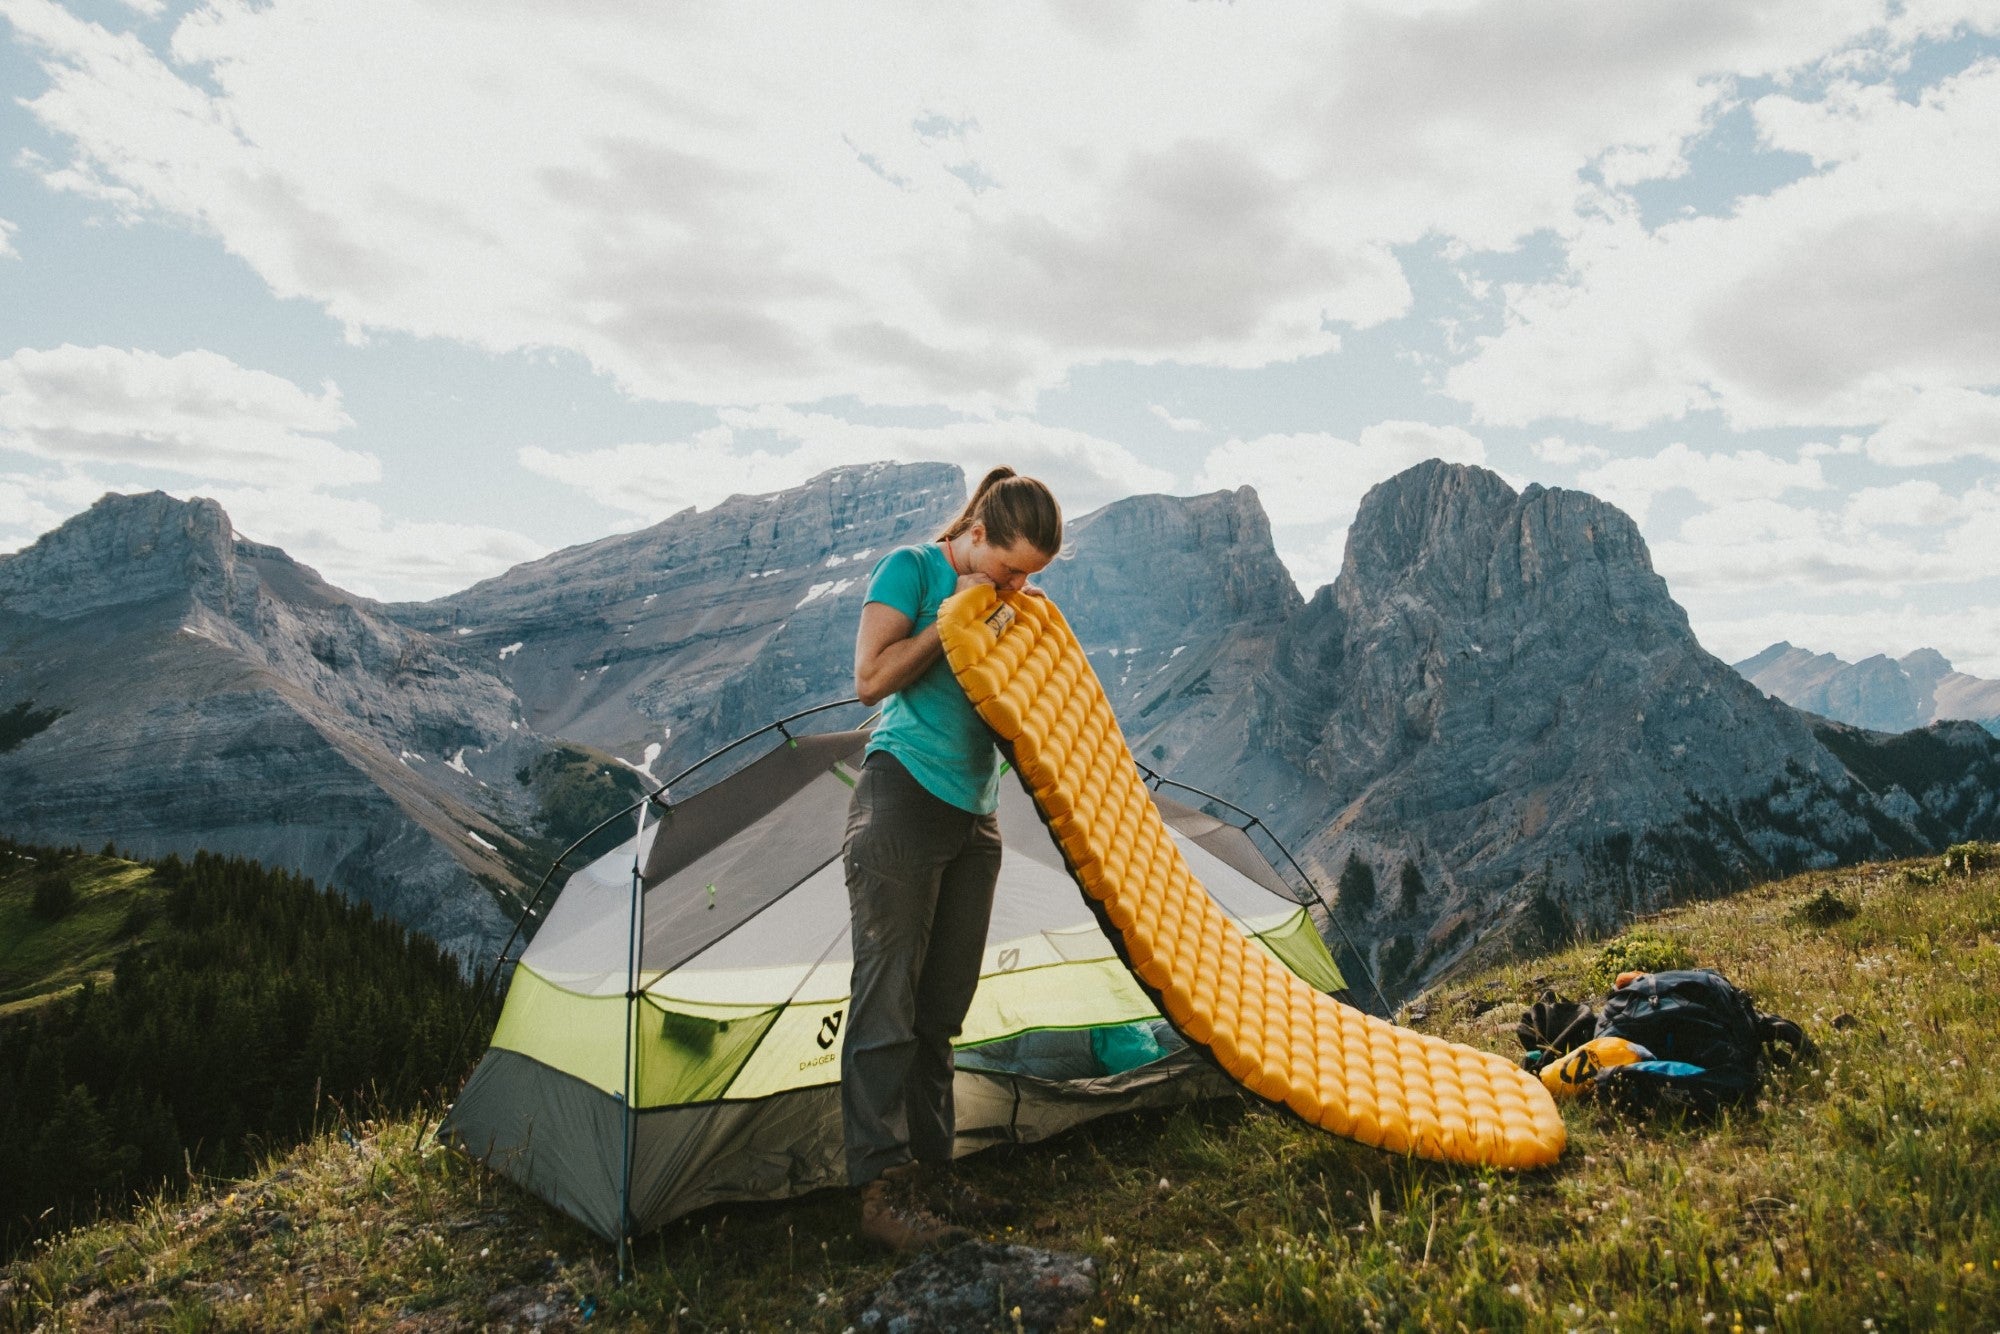 Nemo Tensor Insulated Ultralight Sleeping Pad For Ultralight Hiking, Backpacking, Bikepacking, and Camping